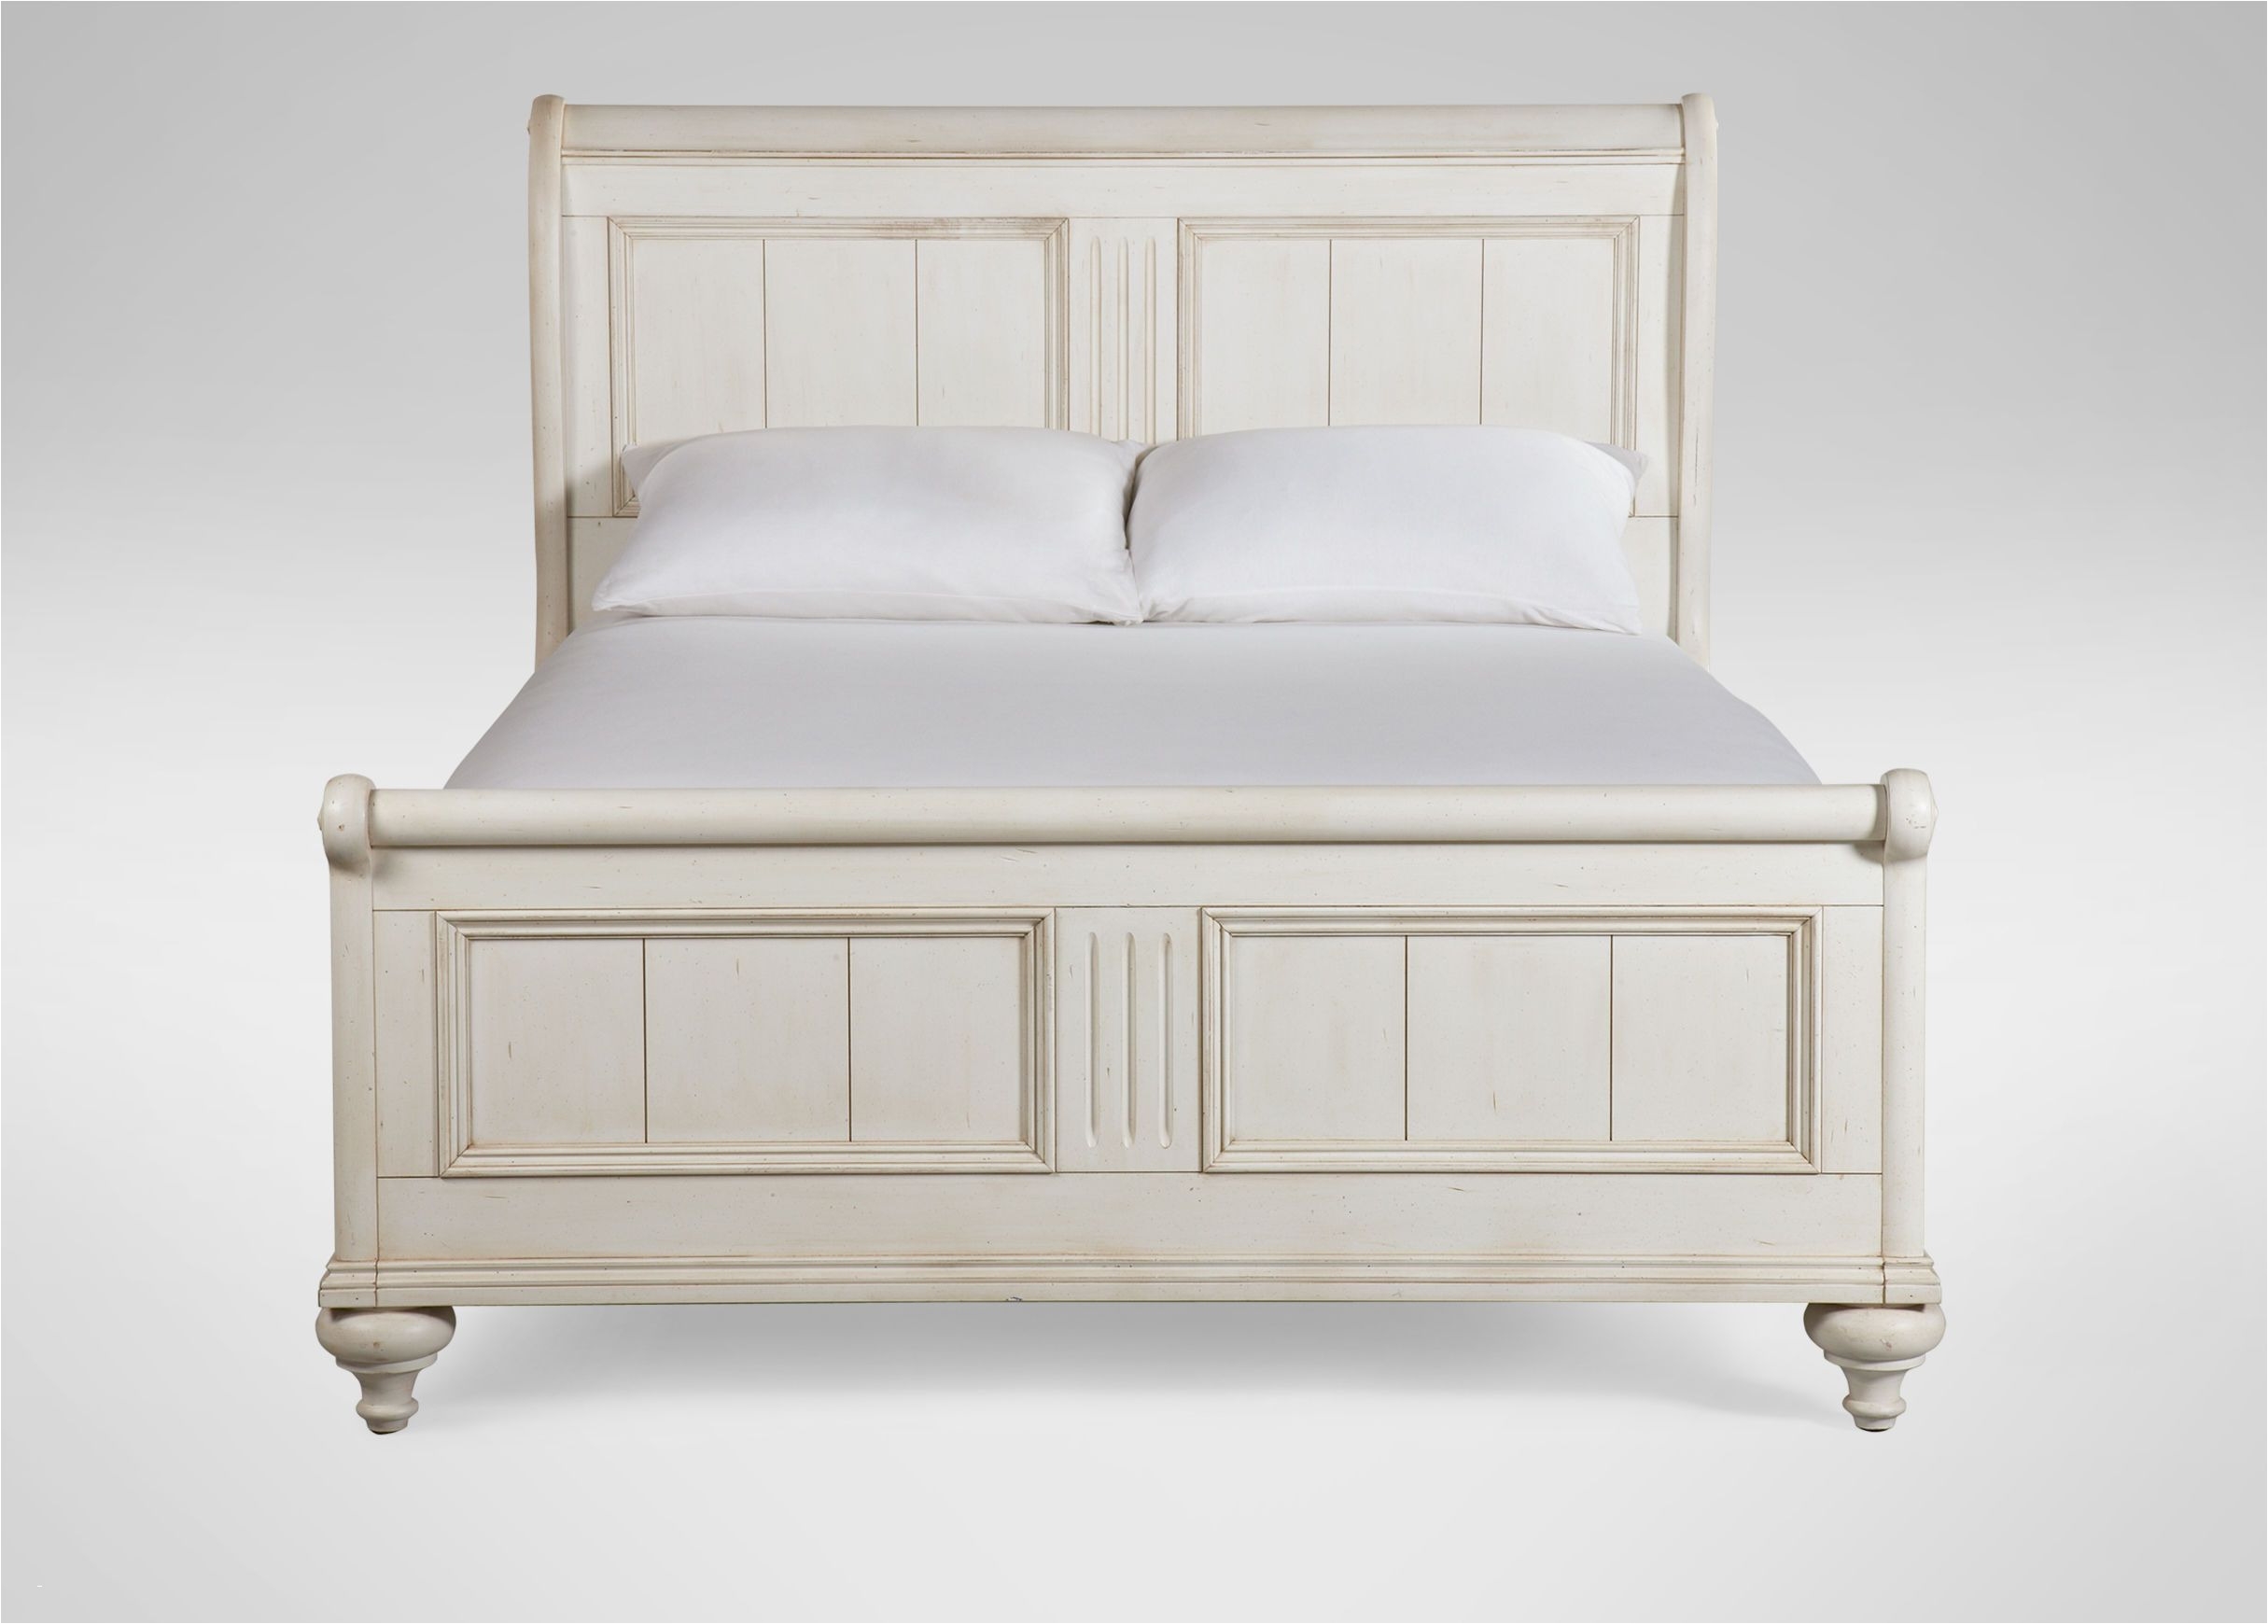 ethan allen dressers bedroom unique robyn bed ethan allen challenging to find french bedroom